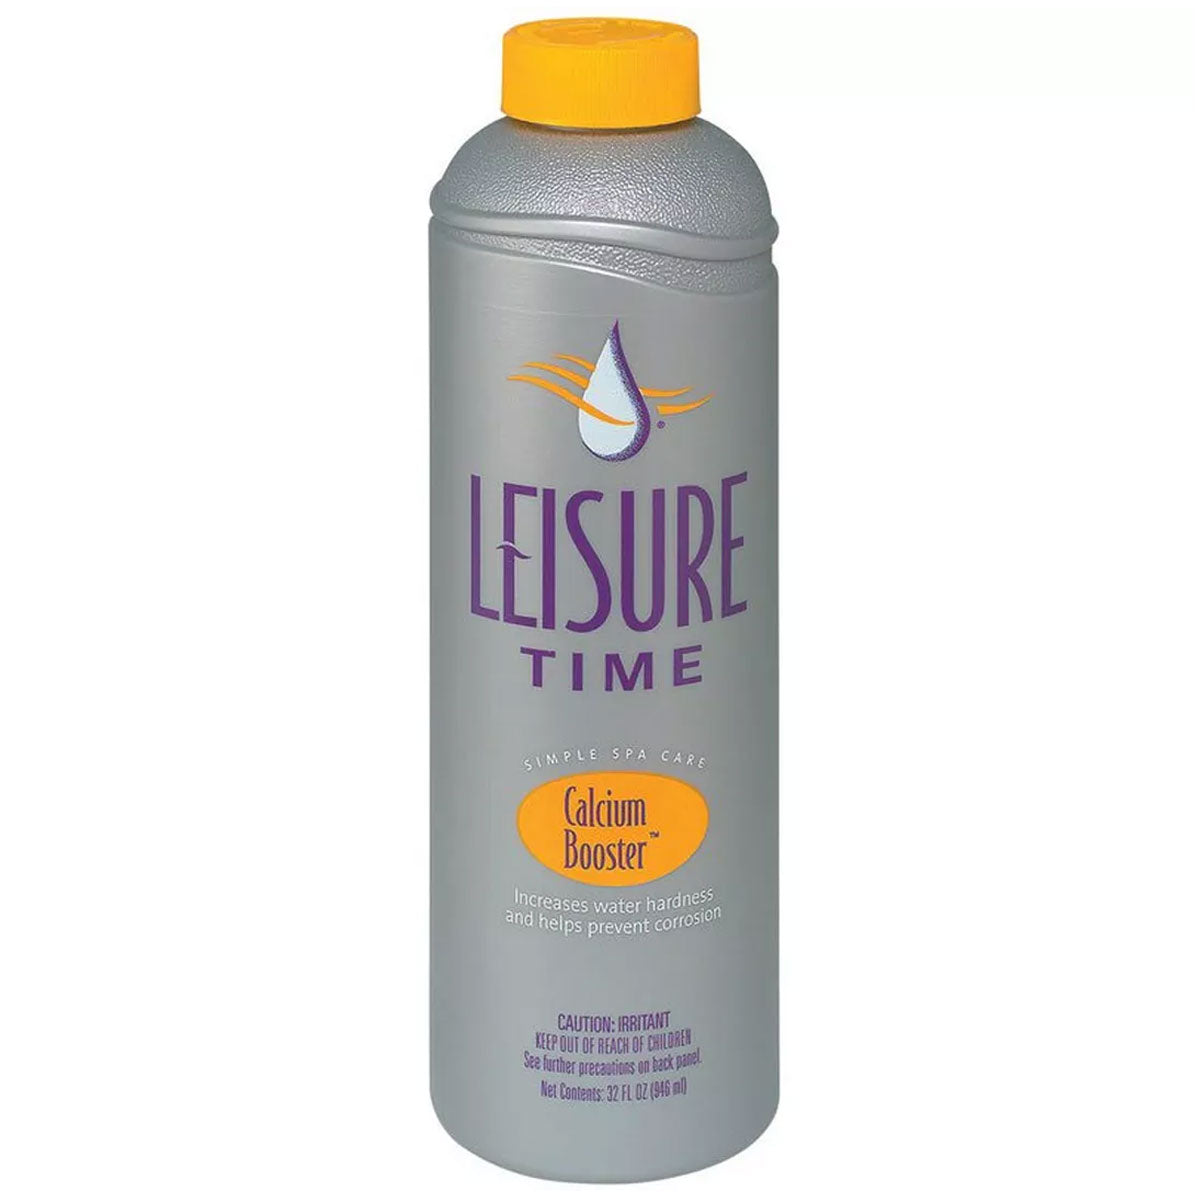 Leisure Time Calcium Booster for hot tubs and spas